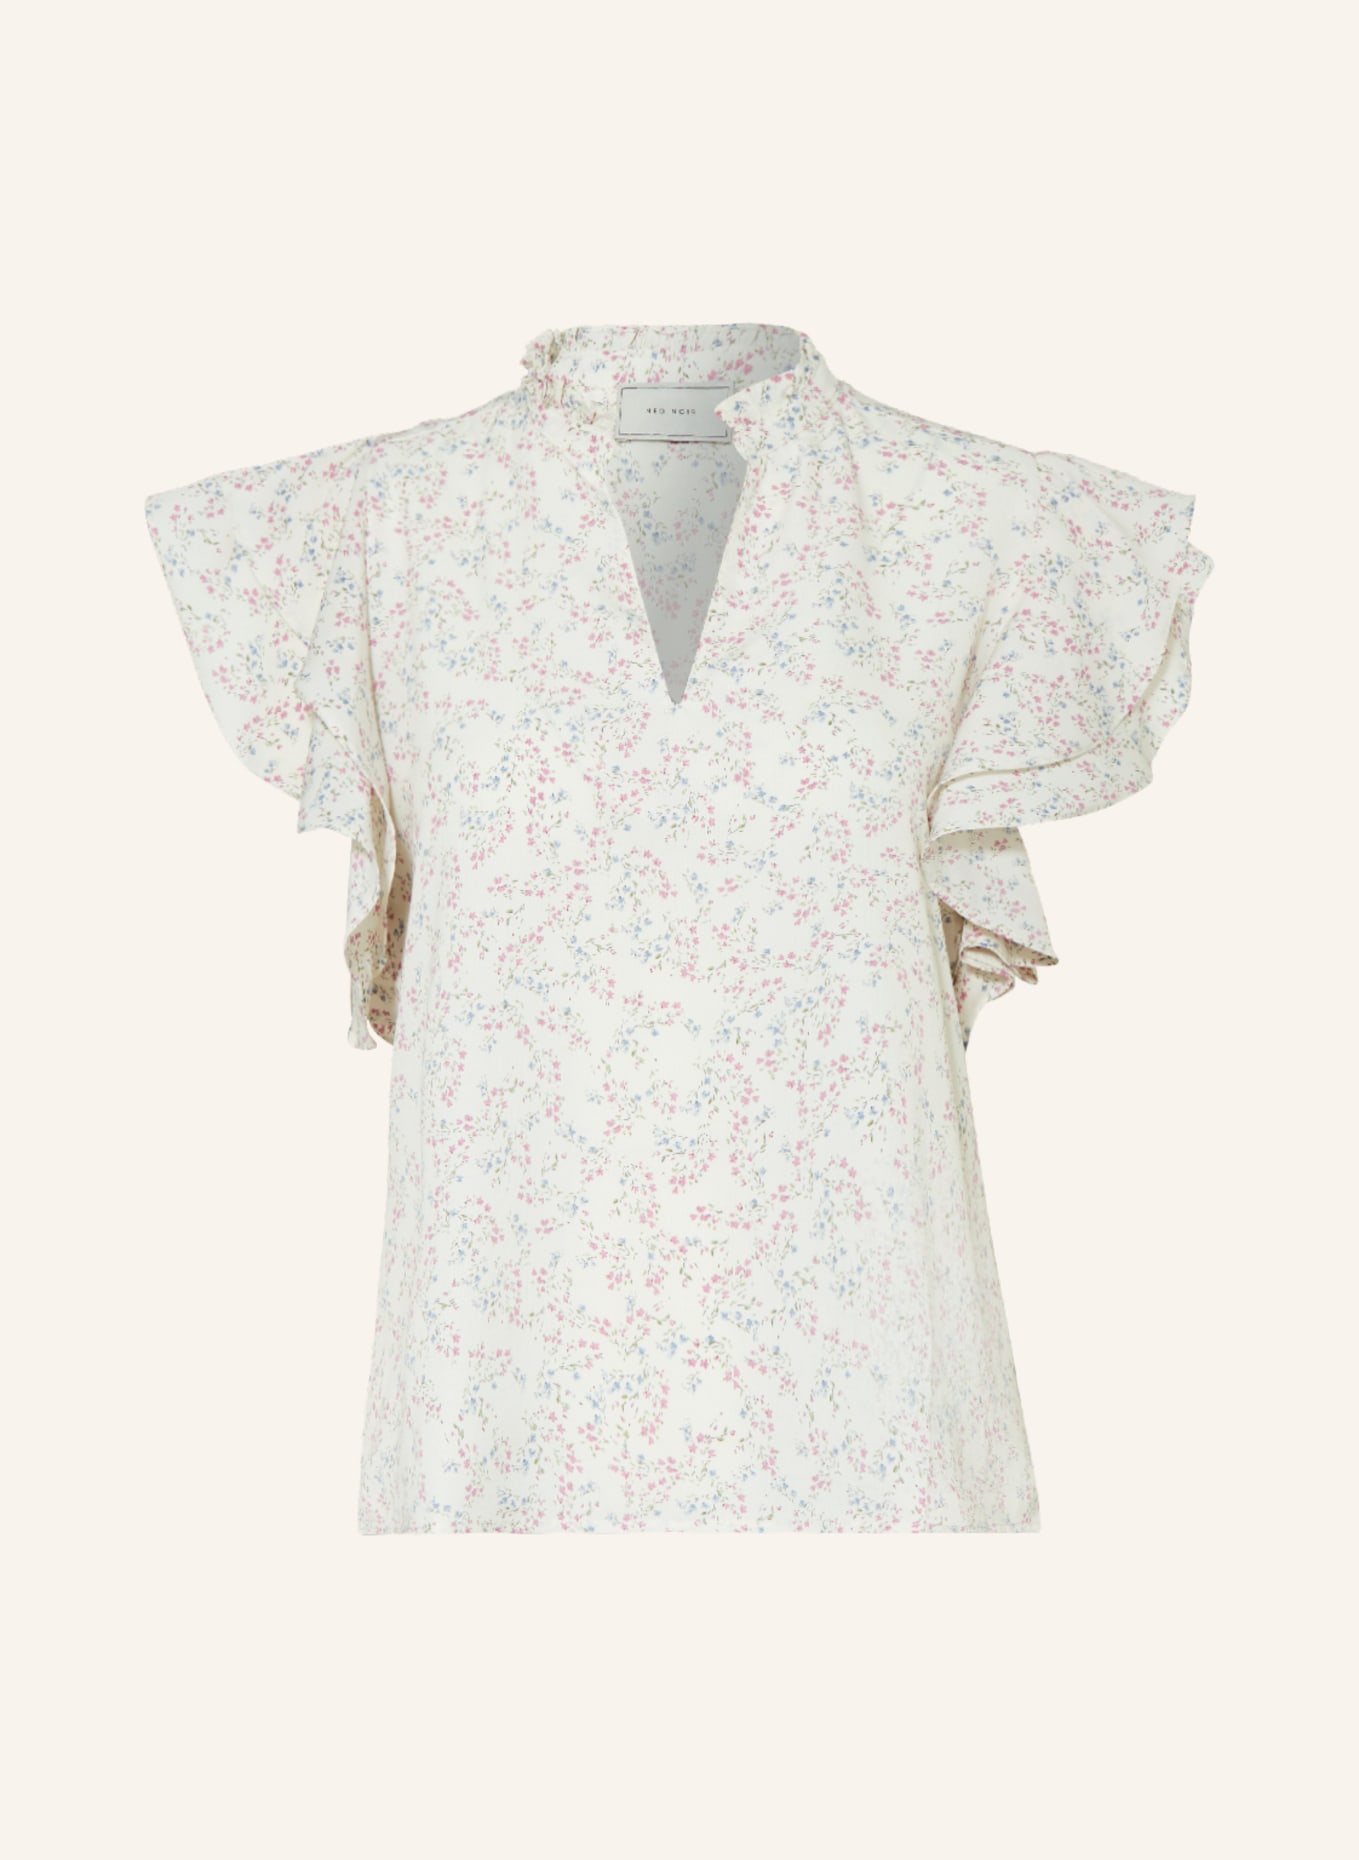 NEO NOIR Shirt blouse with frills, Color: WHITE/ PINK/ LIGHT BLUE (Image 1)